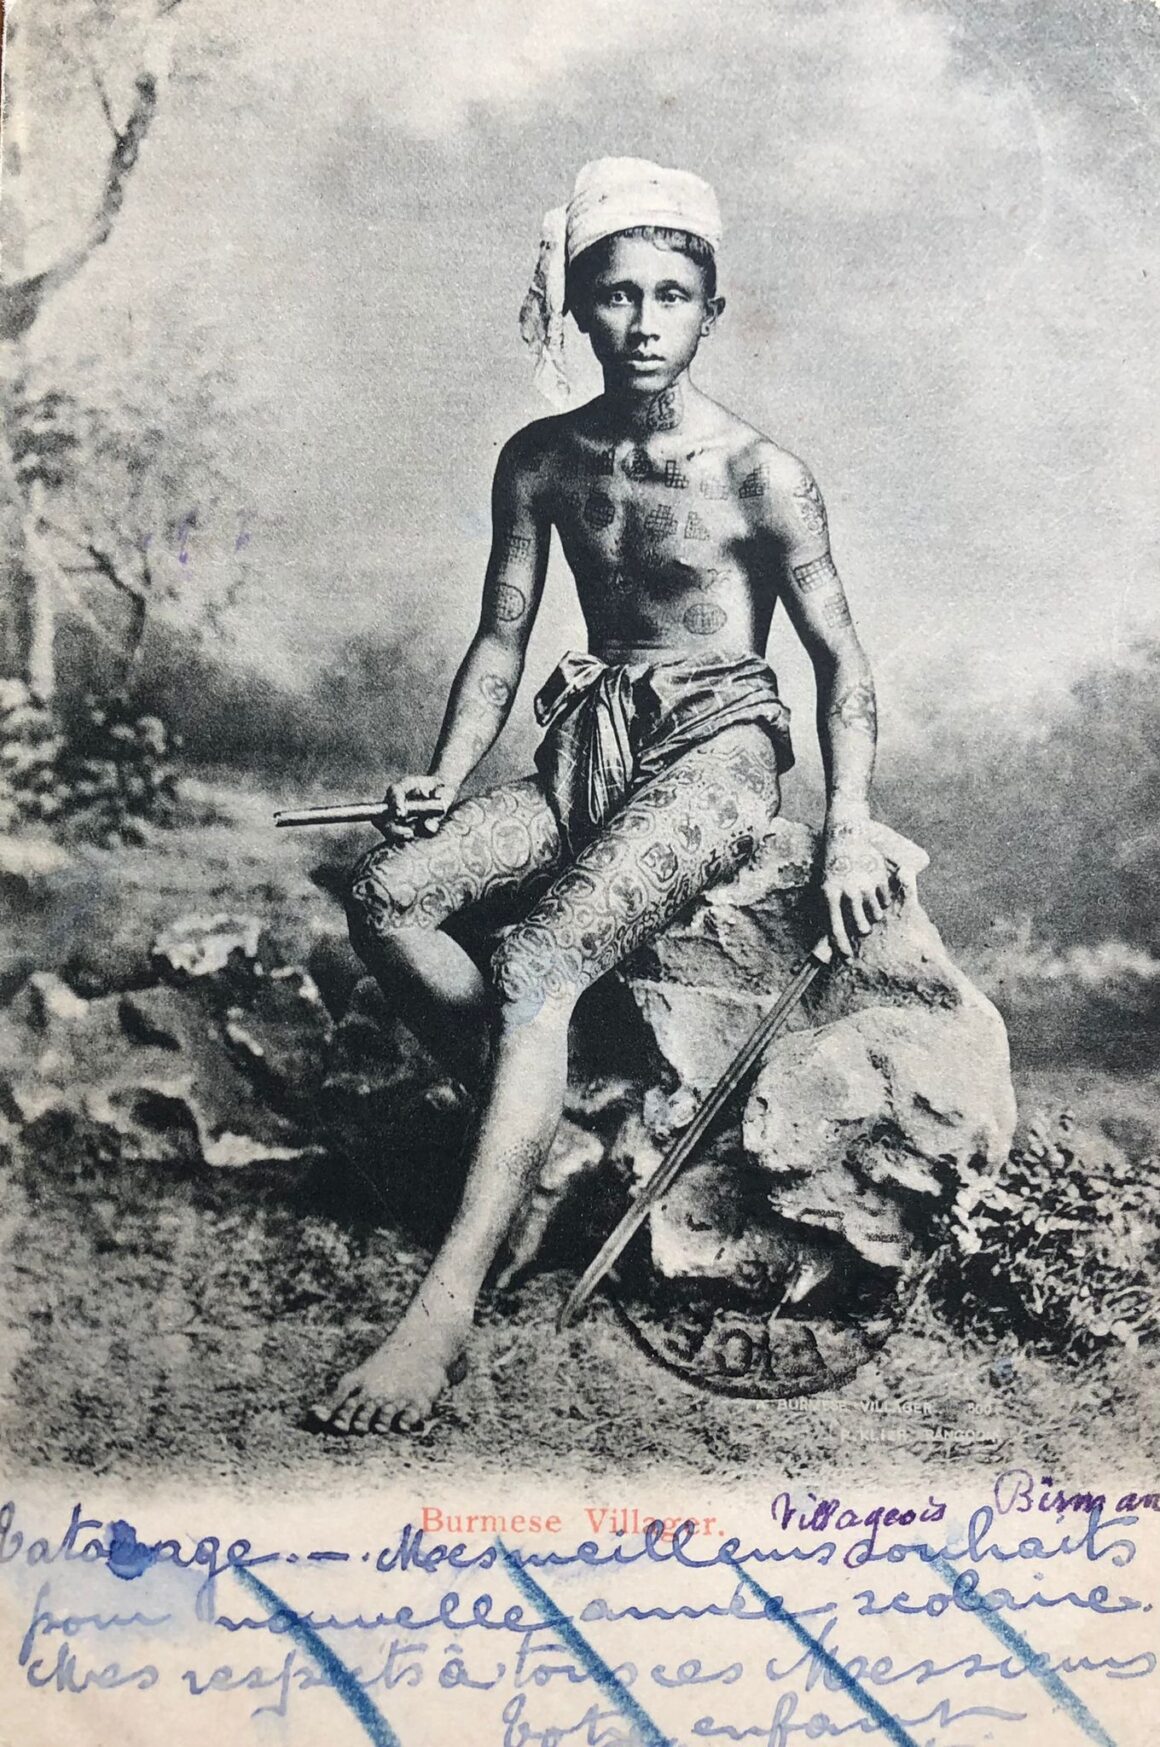 Photo postcard displacing tattooed Burmese villager, first decade of XIX century, from the private collection of Gabriele Gori